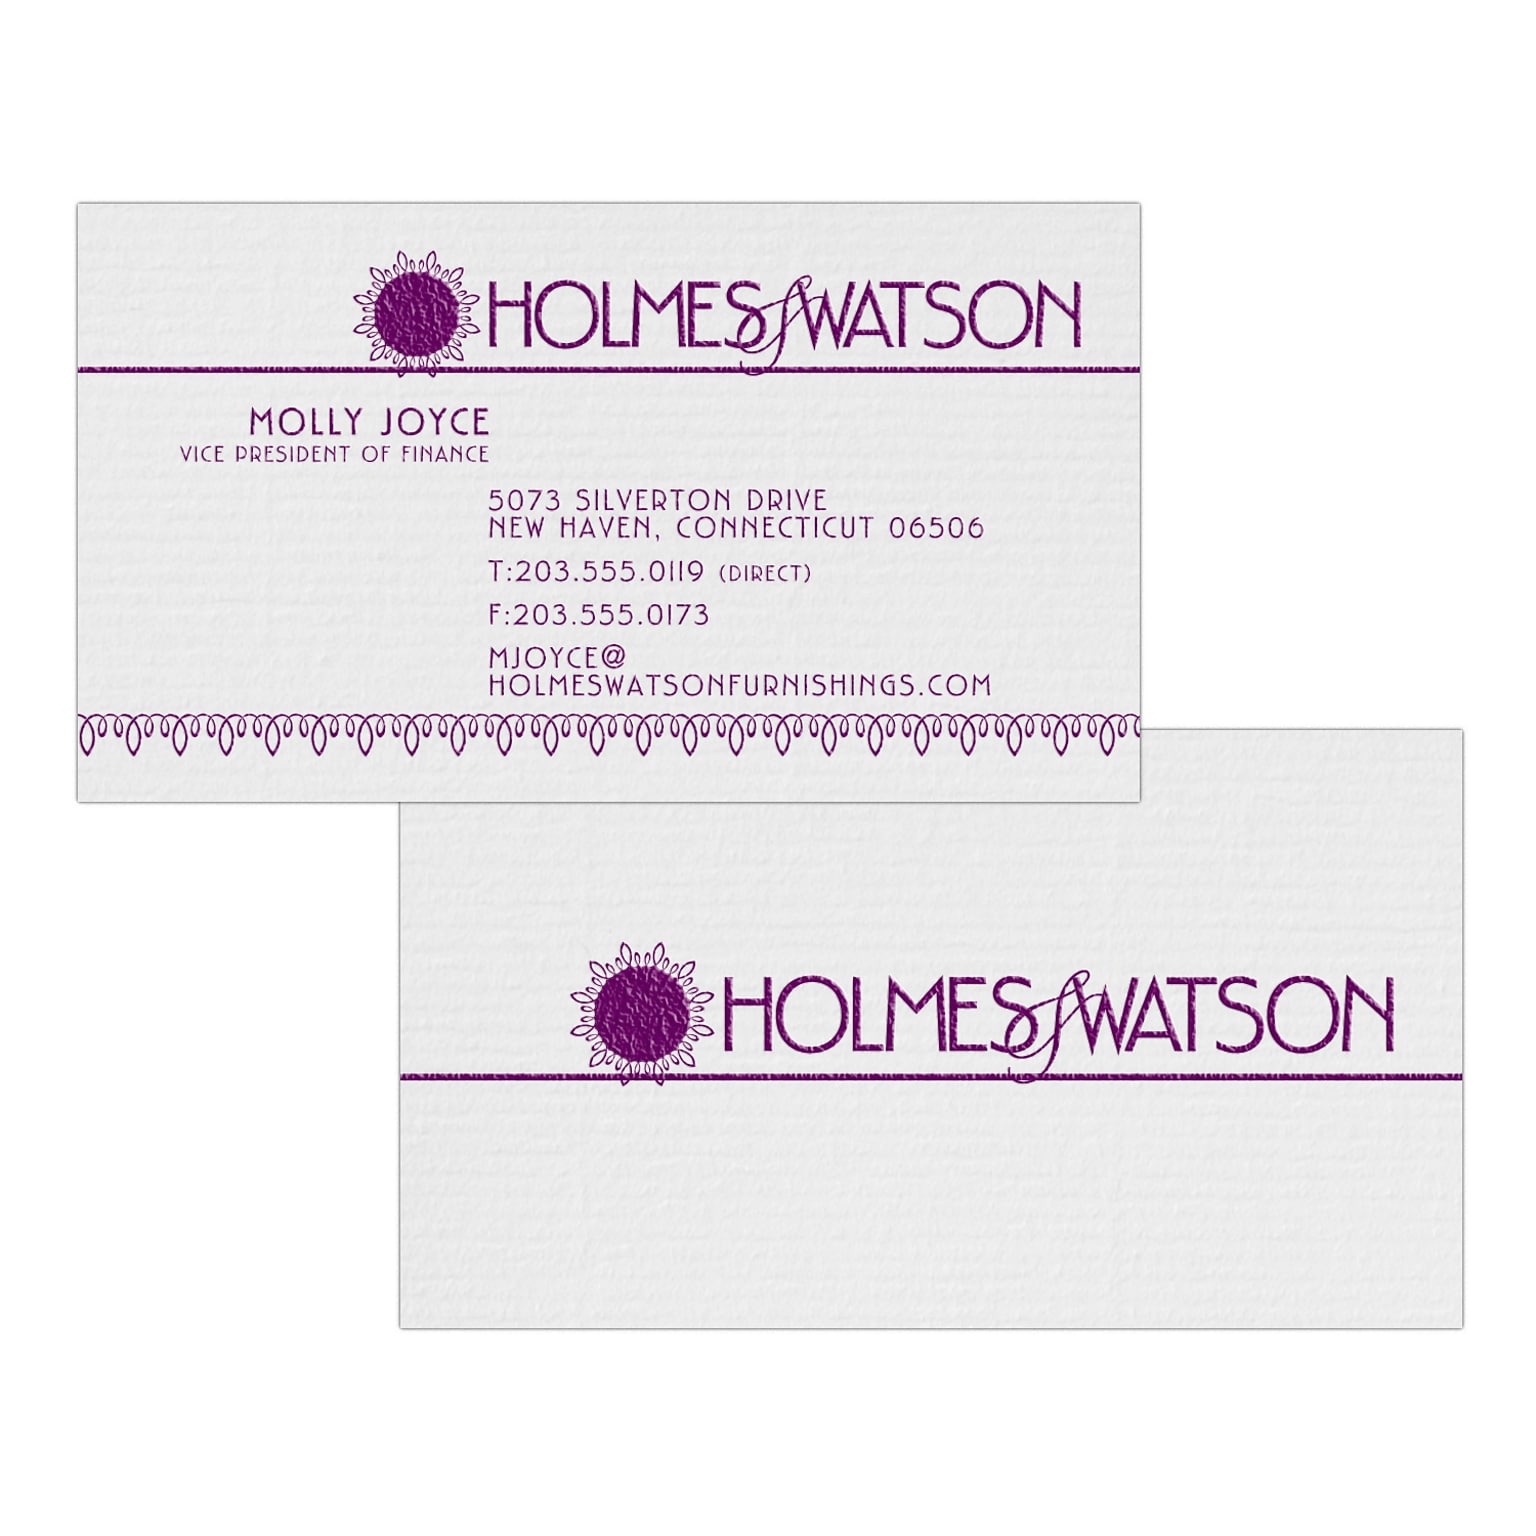 Custom 1-2 Color Business Cards, CLASSIC® Laid Antique Gray 80#, Raised Print, 1 Custom Ink, 2-Sided, 250/PK